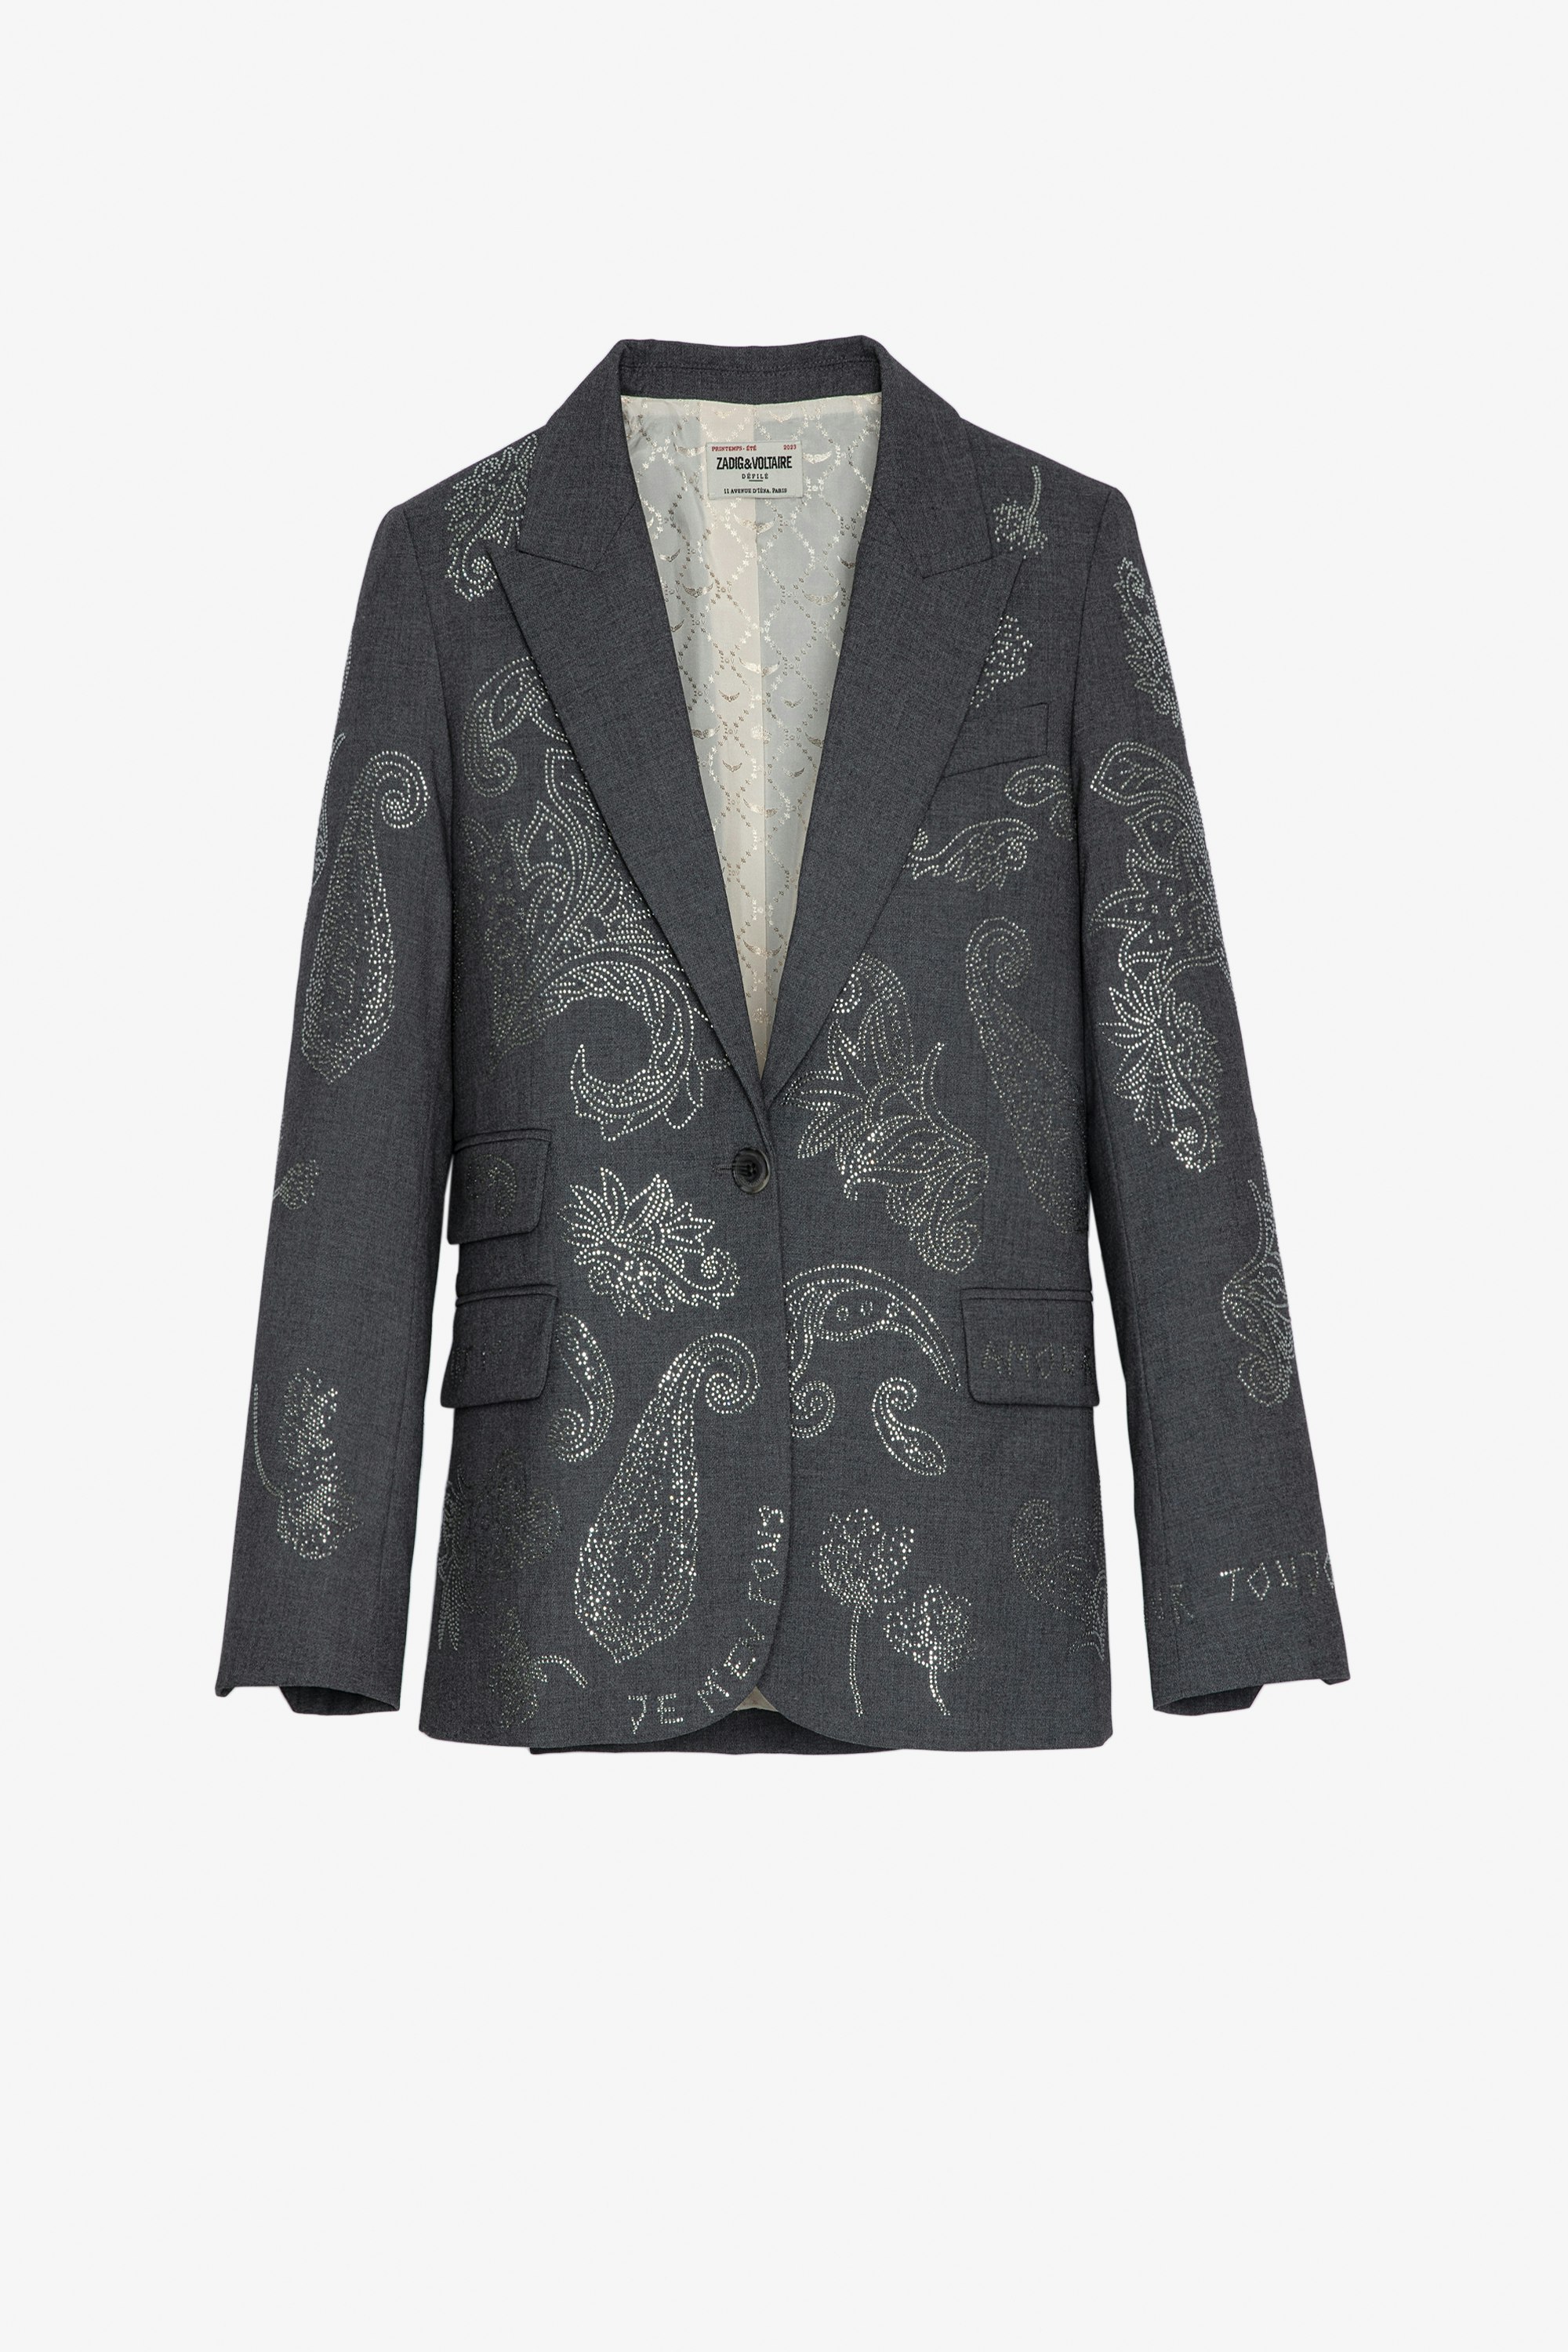 Venus Strass Blazer Women’s grey tailored jacket with paisley pattern decorated with strass